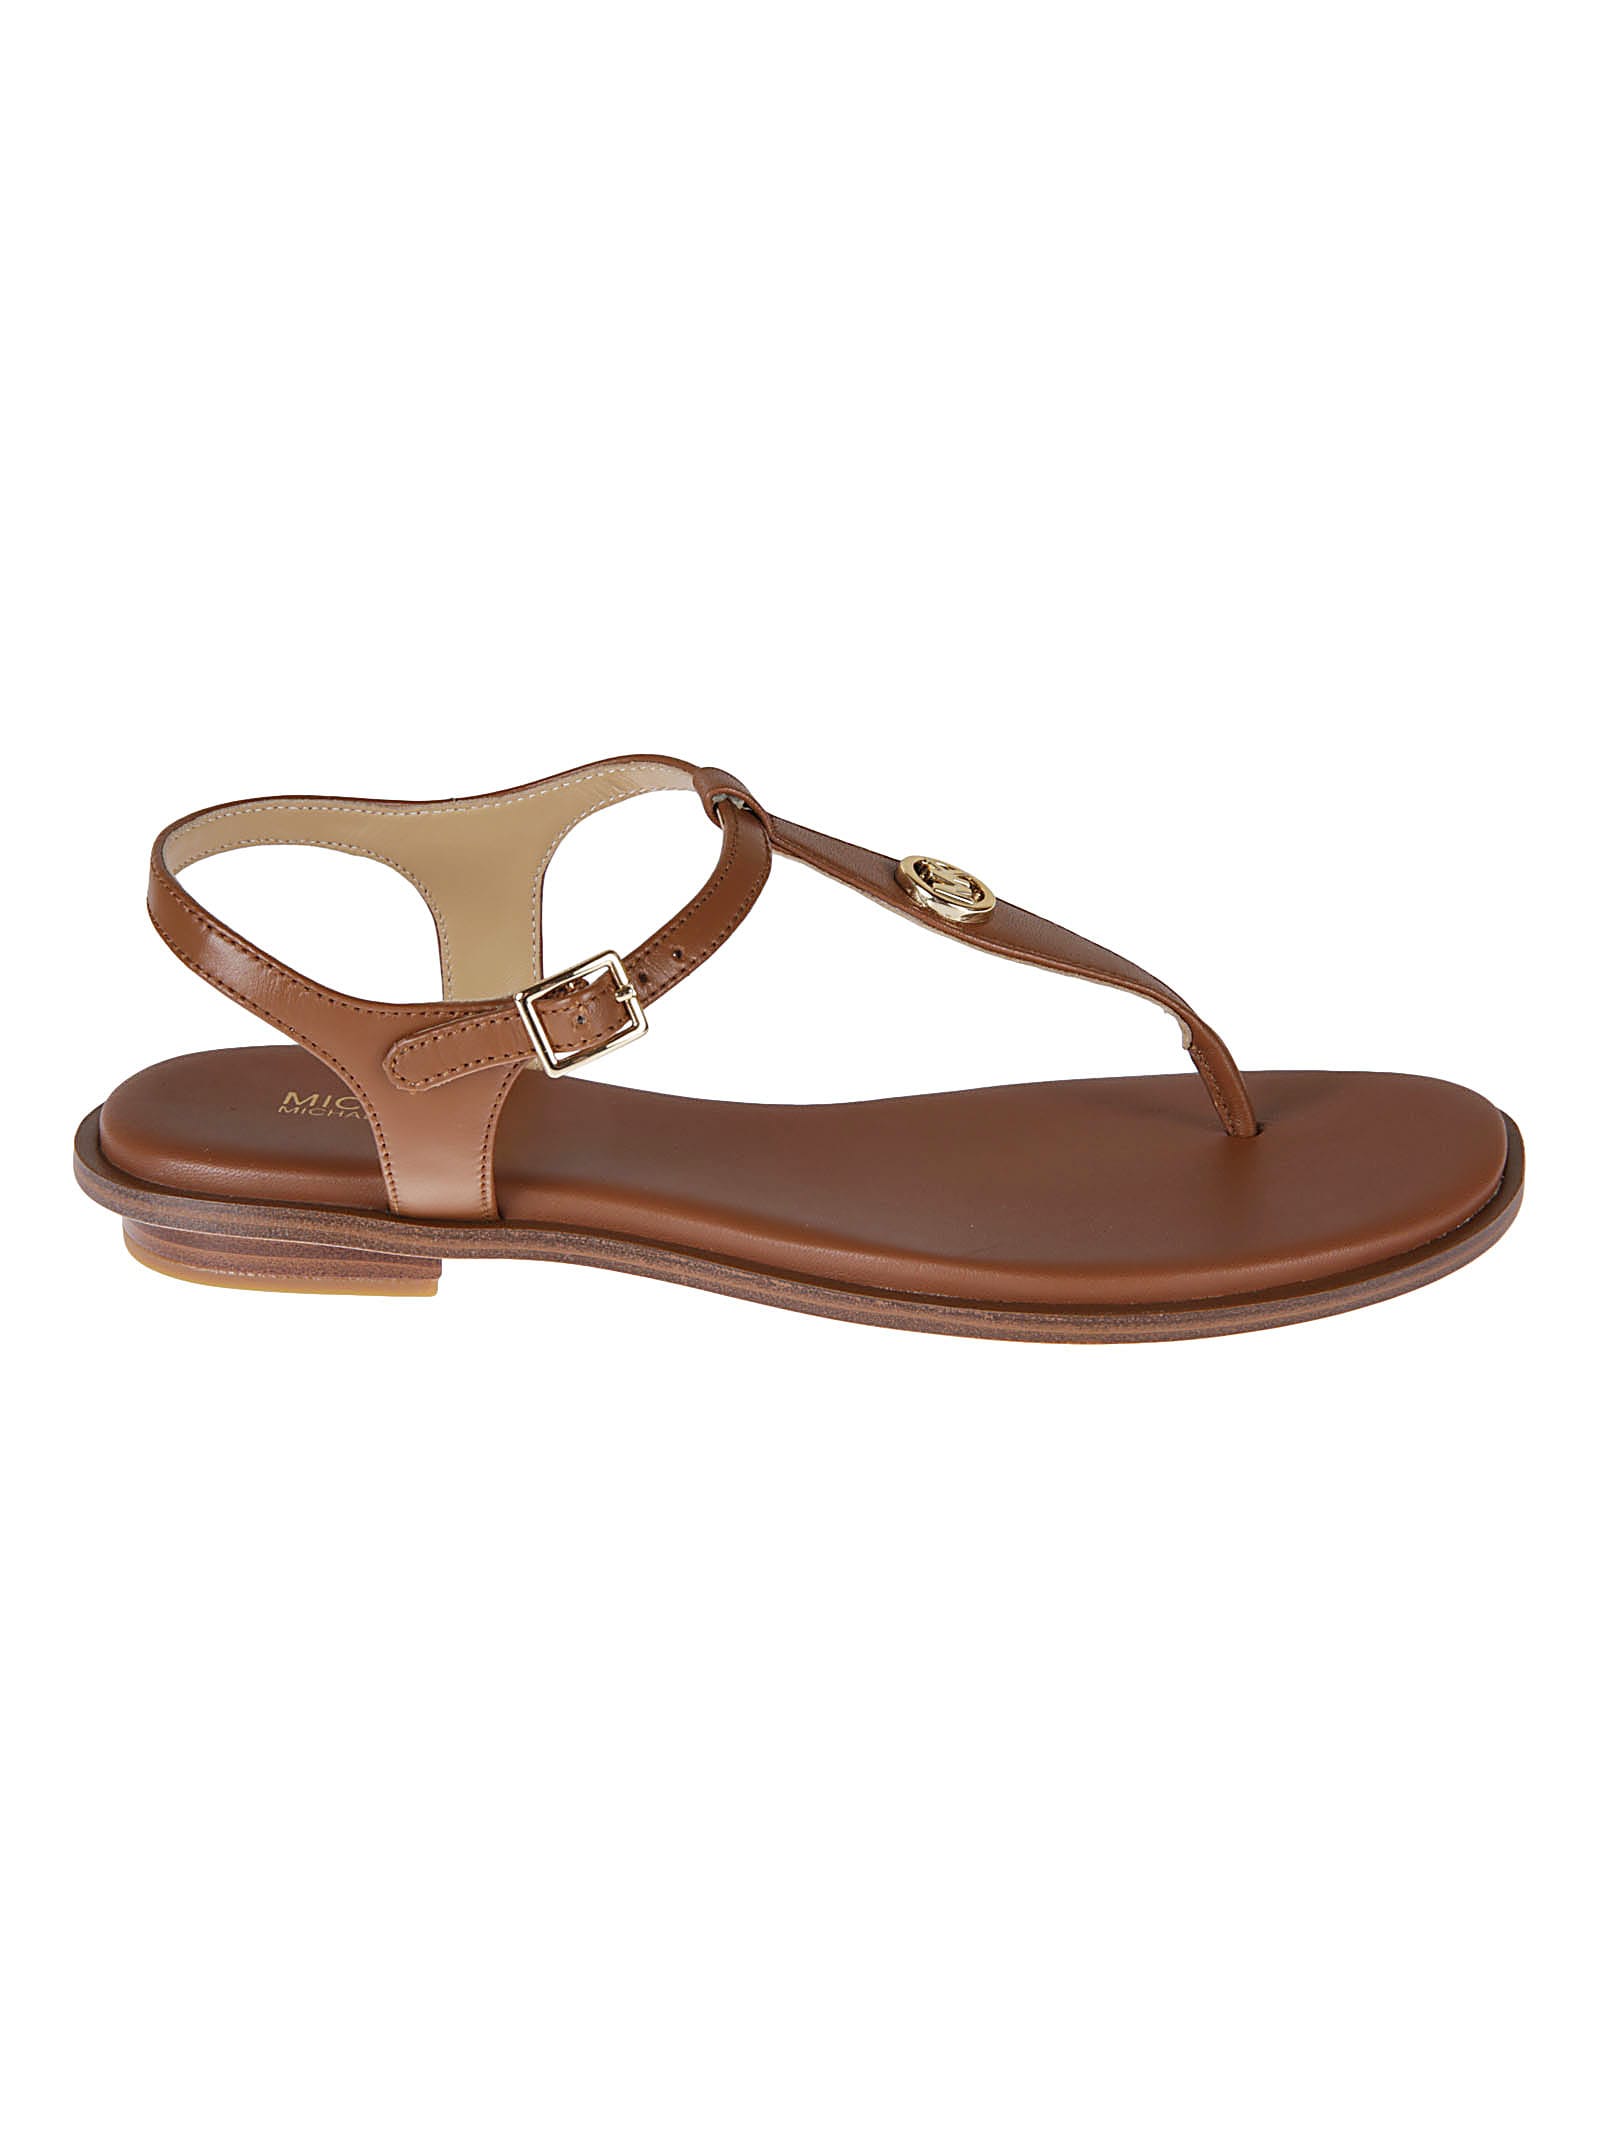 Michael Kors Mallory Thong Sandals In Luggage